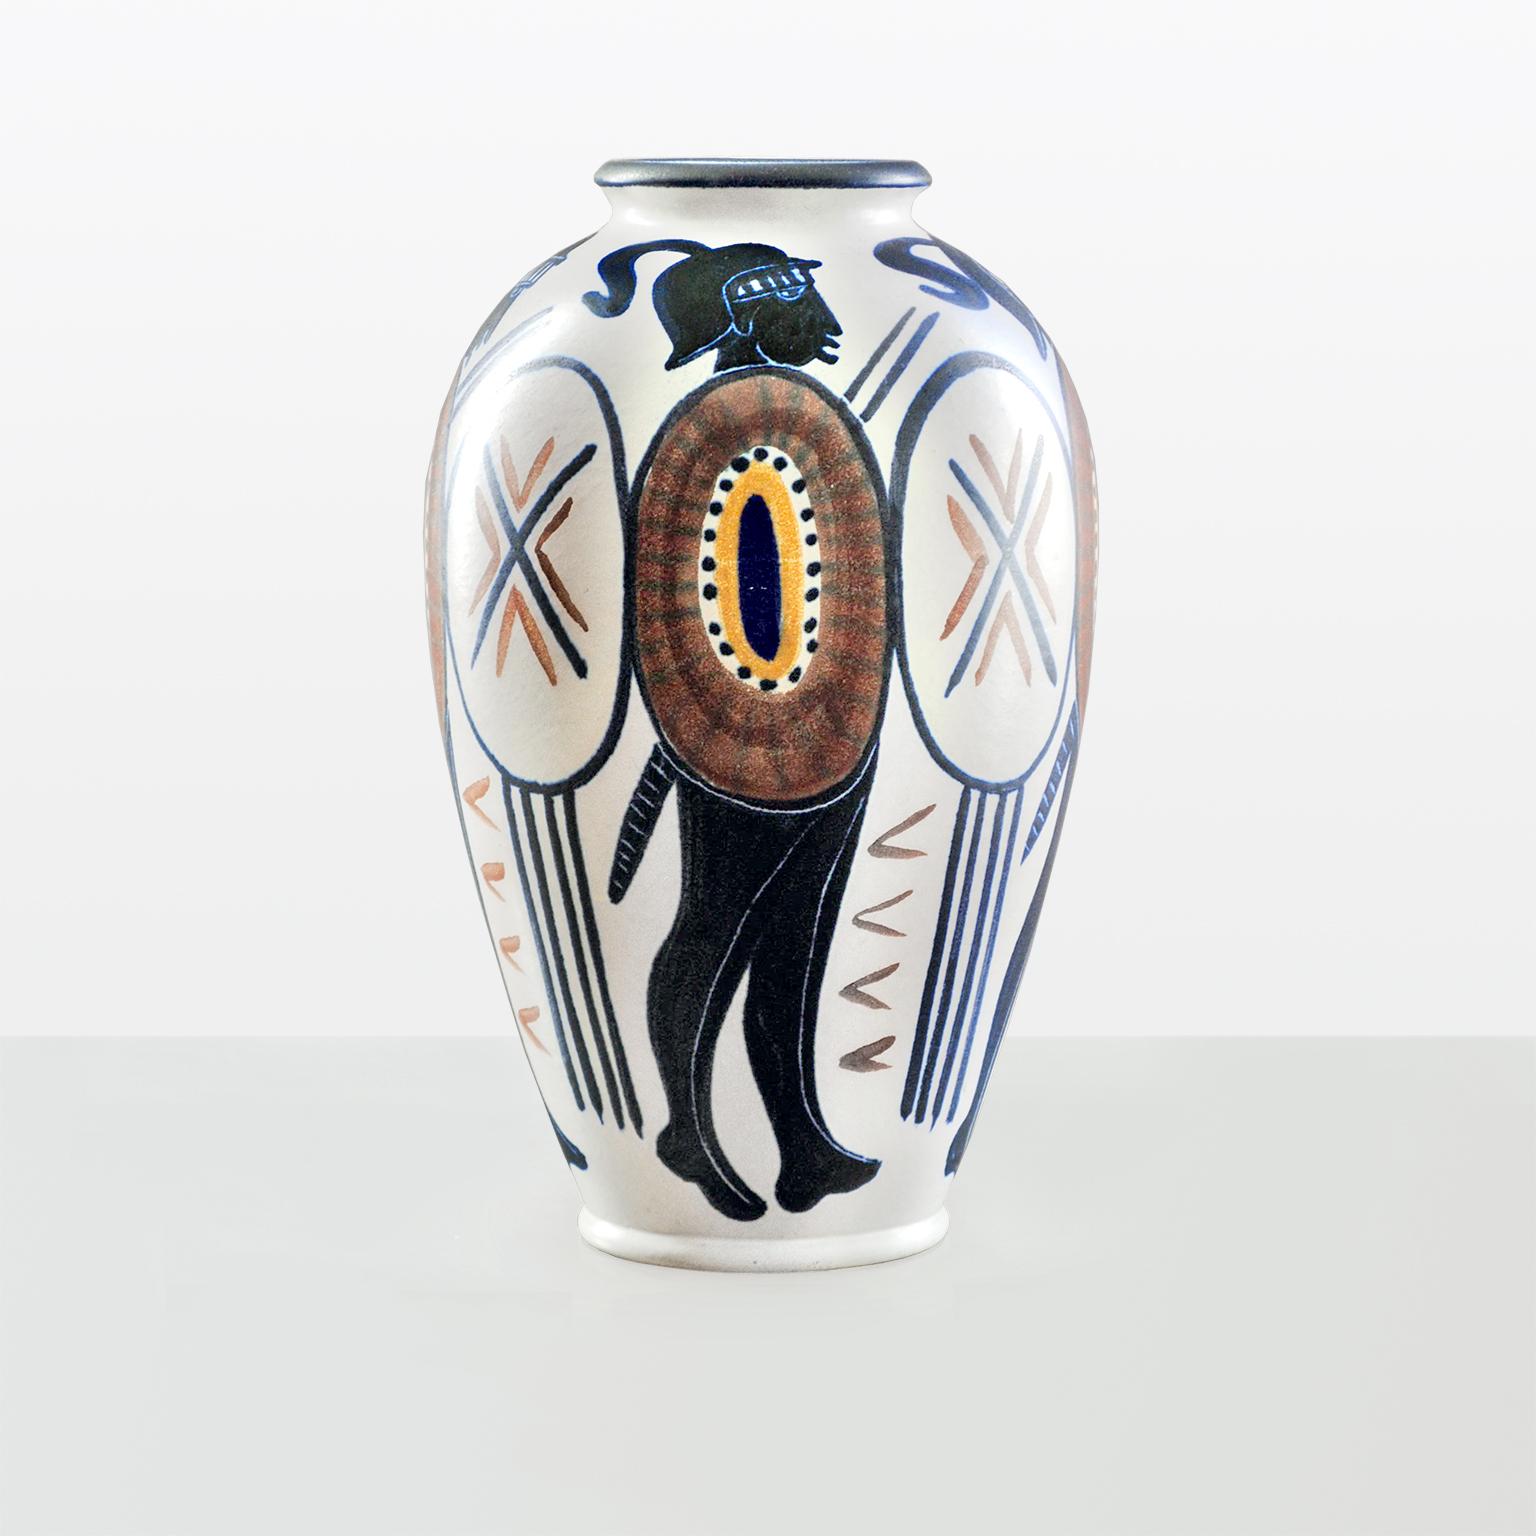 Large Scandinavian midcentury ceramic vase with hand-painted figures by Mette Doller for Andersson and Johansson, Hoganas, Sweden.

Measures: Height 16